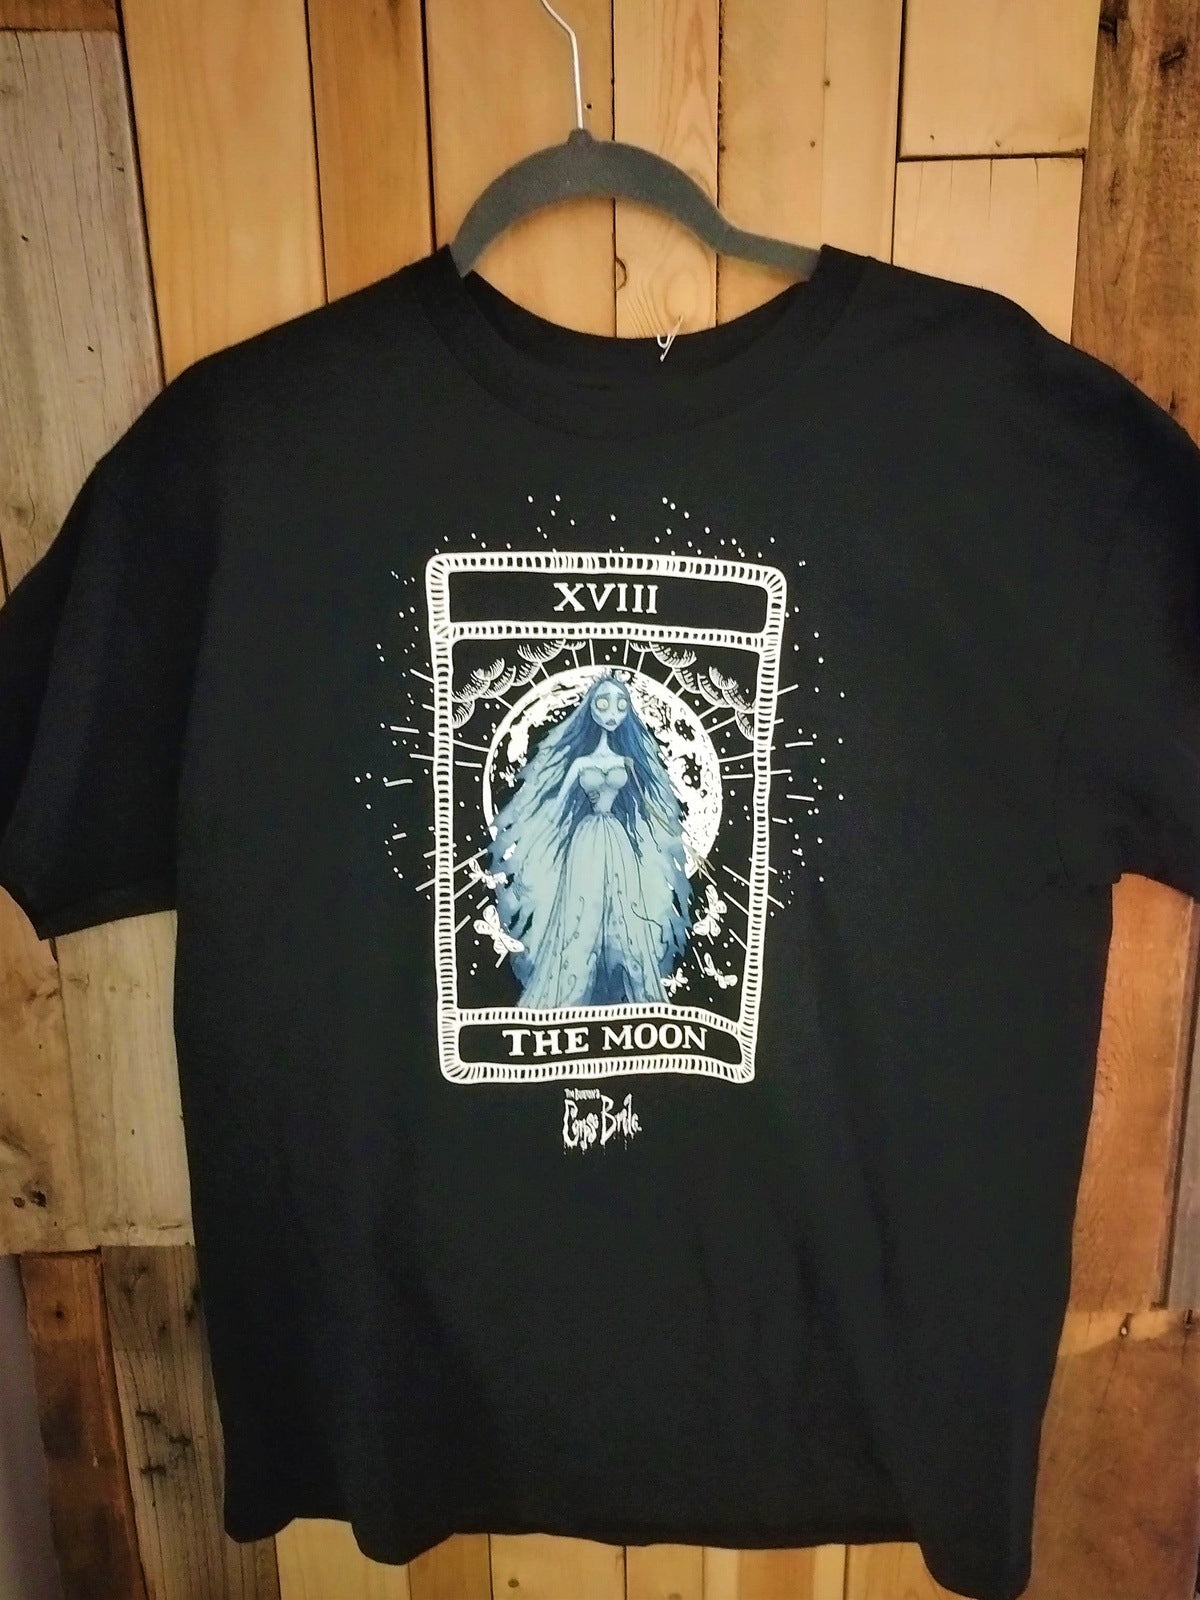 Tim Burton's "Corpse Bride" Official Merchandise T Shirt Size XL New with Tags